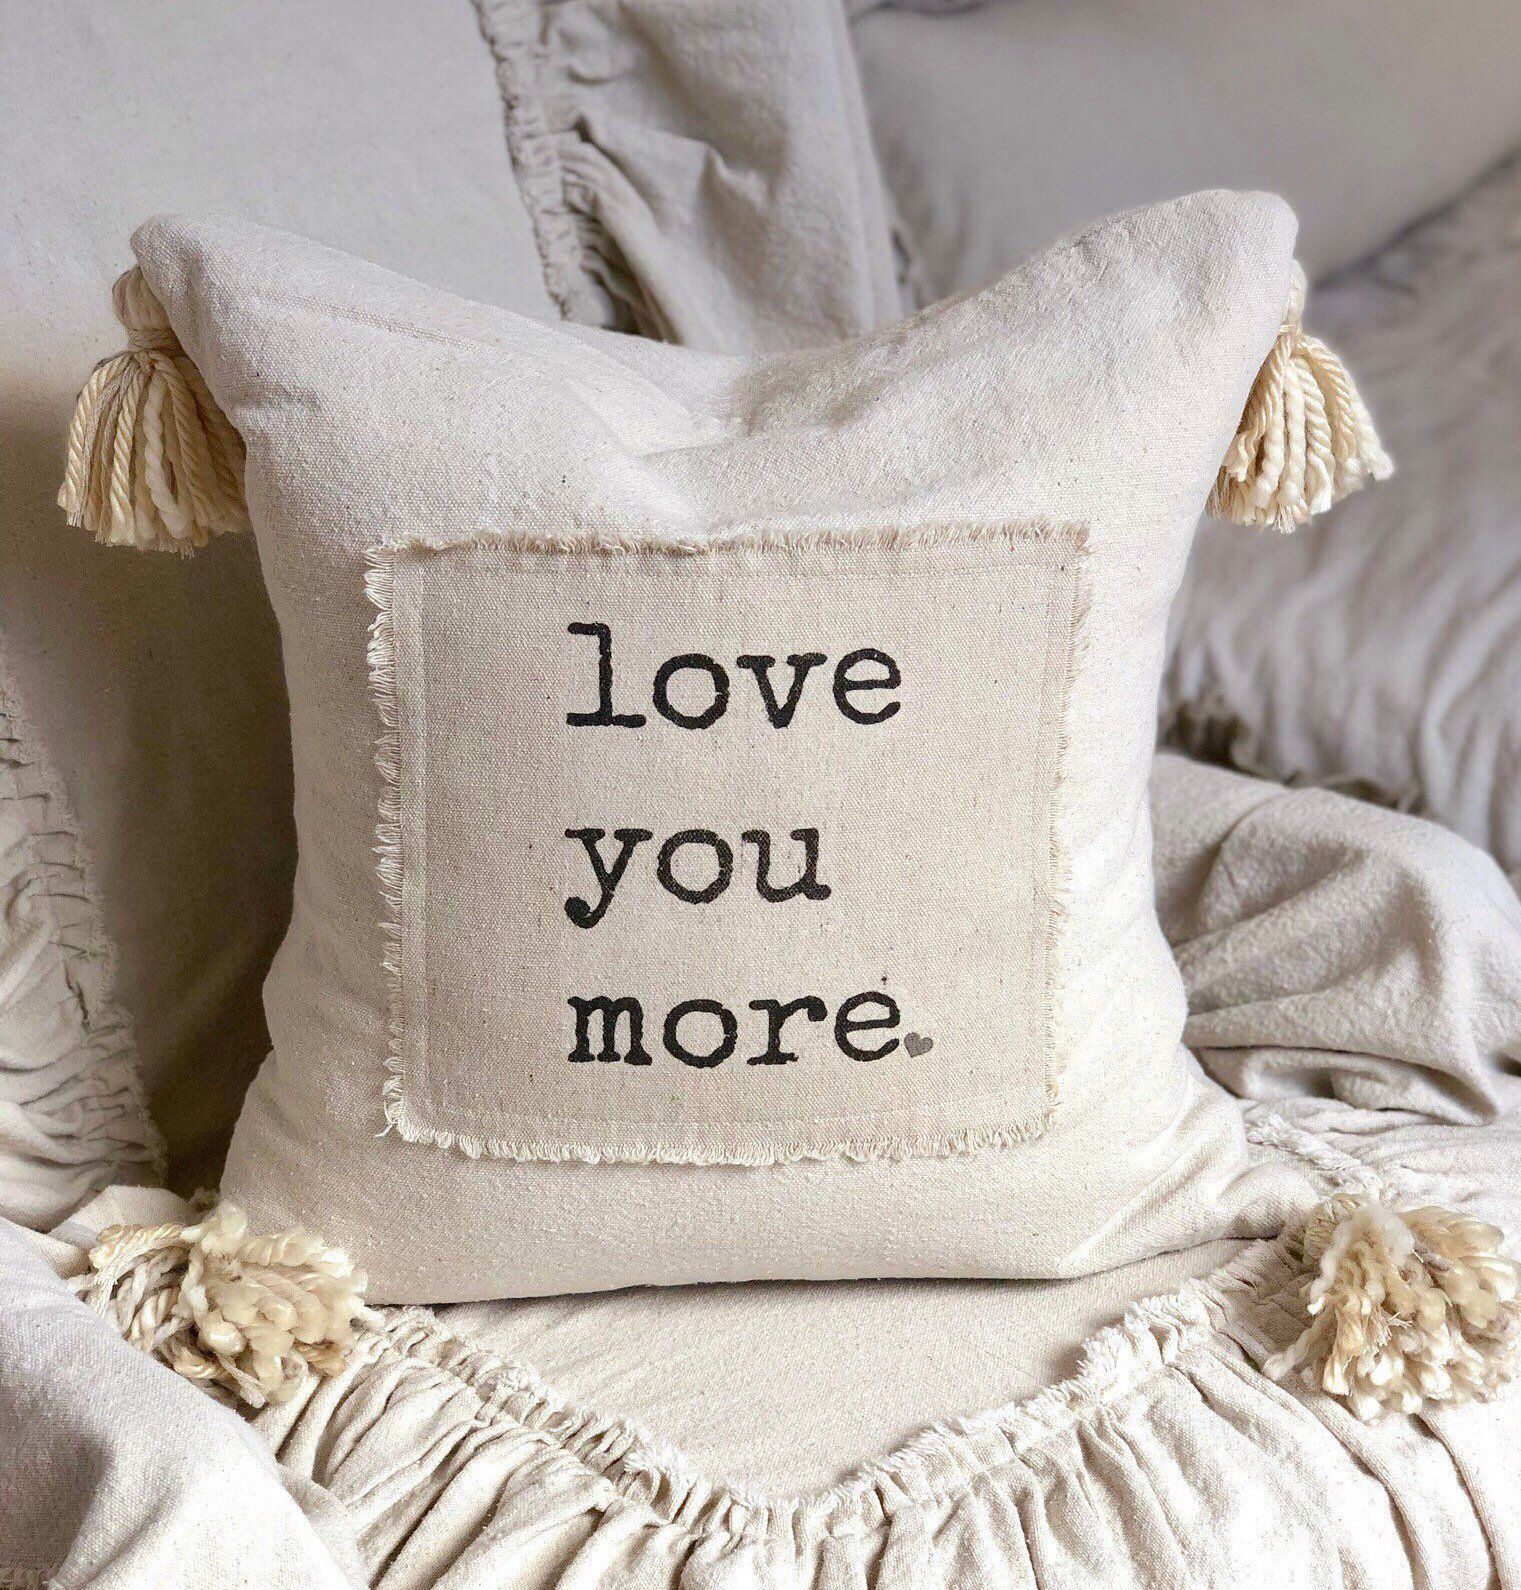 Custom Handmade Pillow Cover with Saying,Love you more,Ivory Rustic pillow with Tassels.Boho pillow,French Country,Farmhouse Bedding, Gift - Custom Handmade Pillow Cover with Saying,Love you more,Ivory Rustic pillow with Tassels.Boho pillow,French Country,Farmhouse Bedding, Gift -   16 diy Pillows rustic ideas